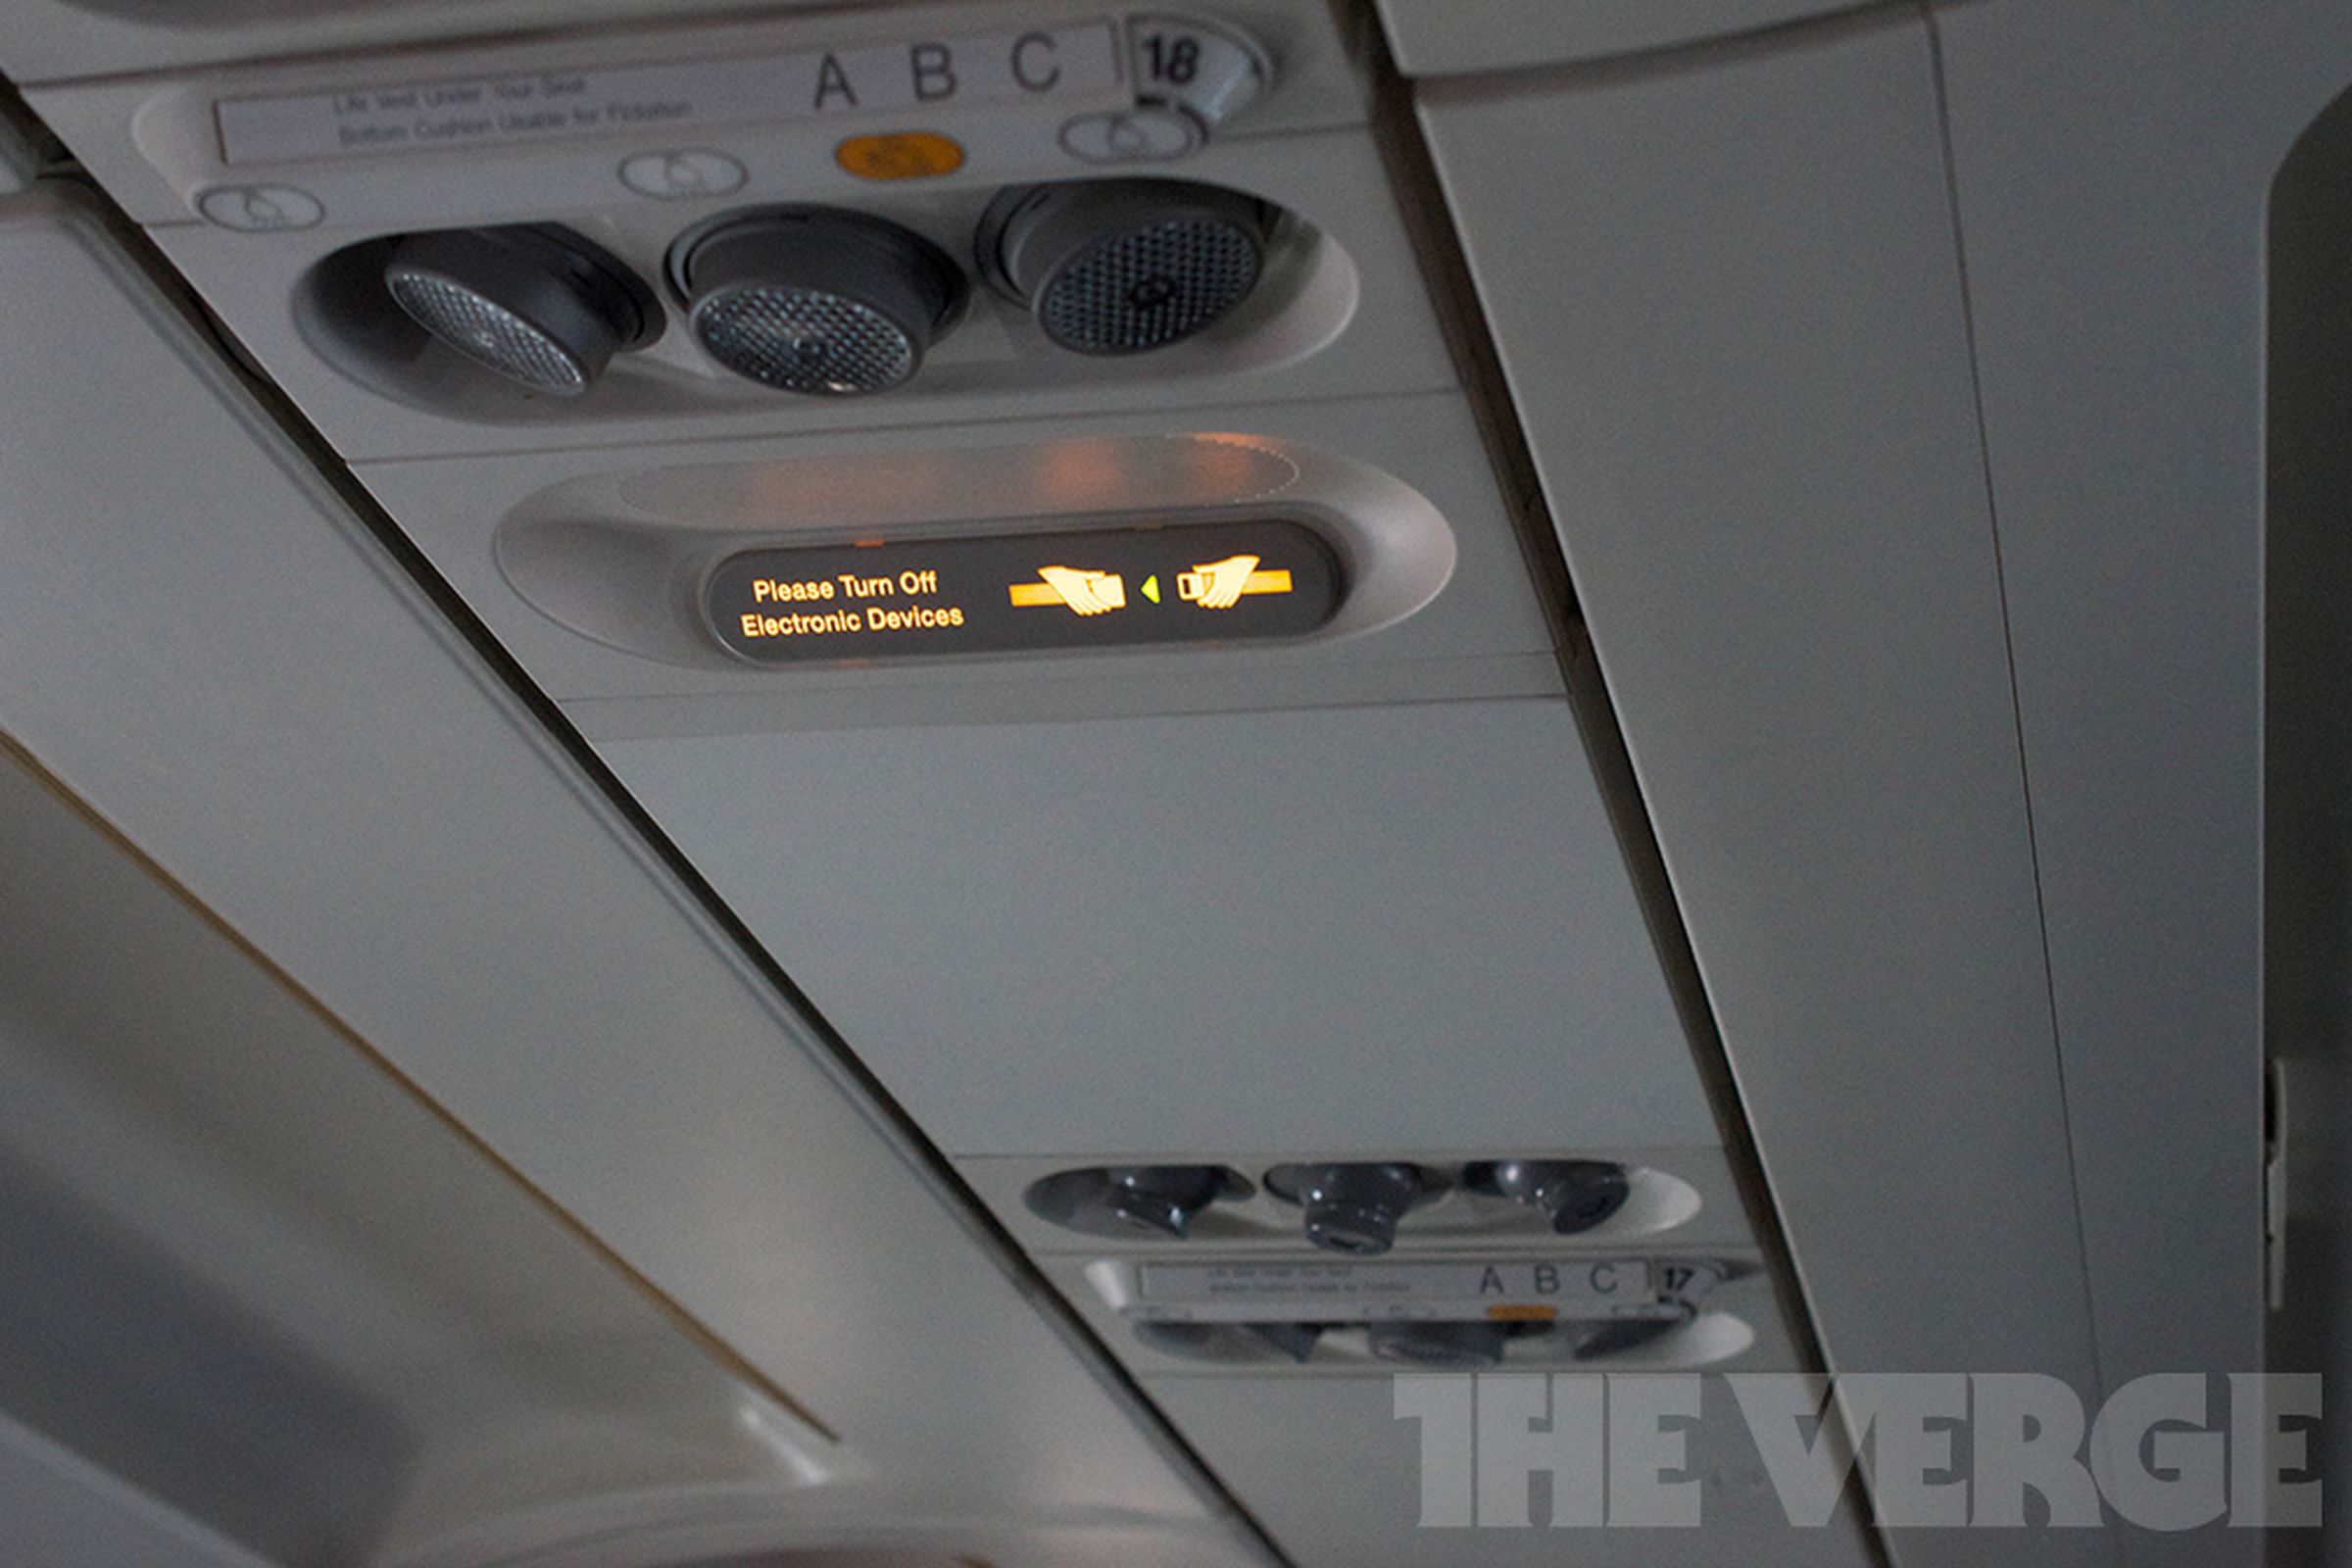 please turn off electronic devices in-flight (1020)